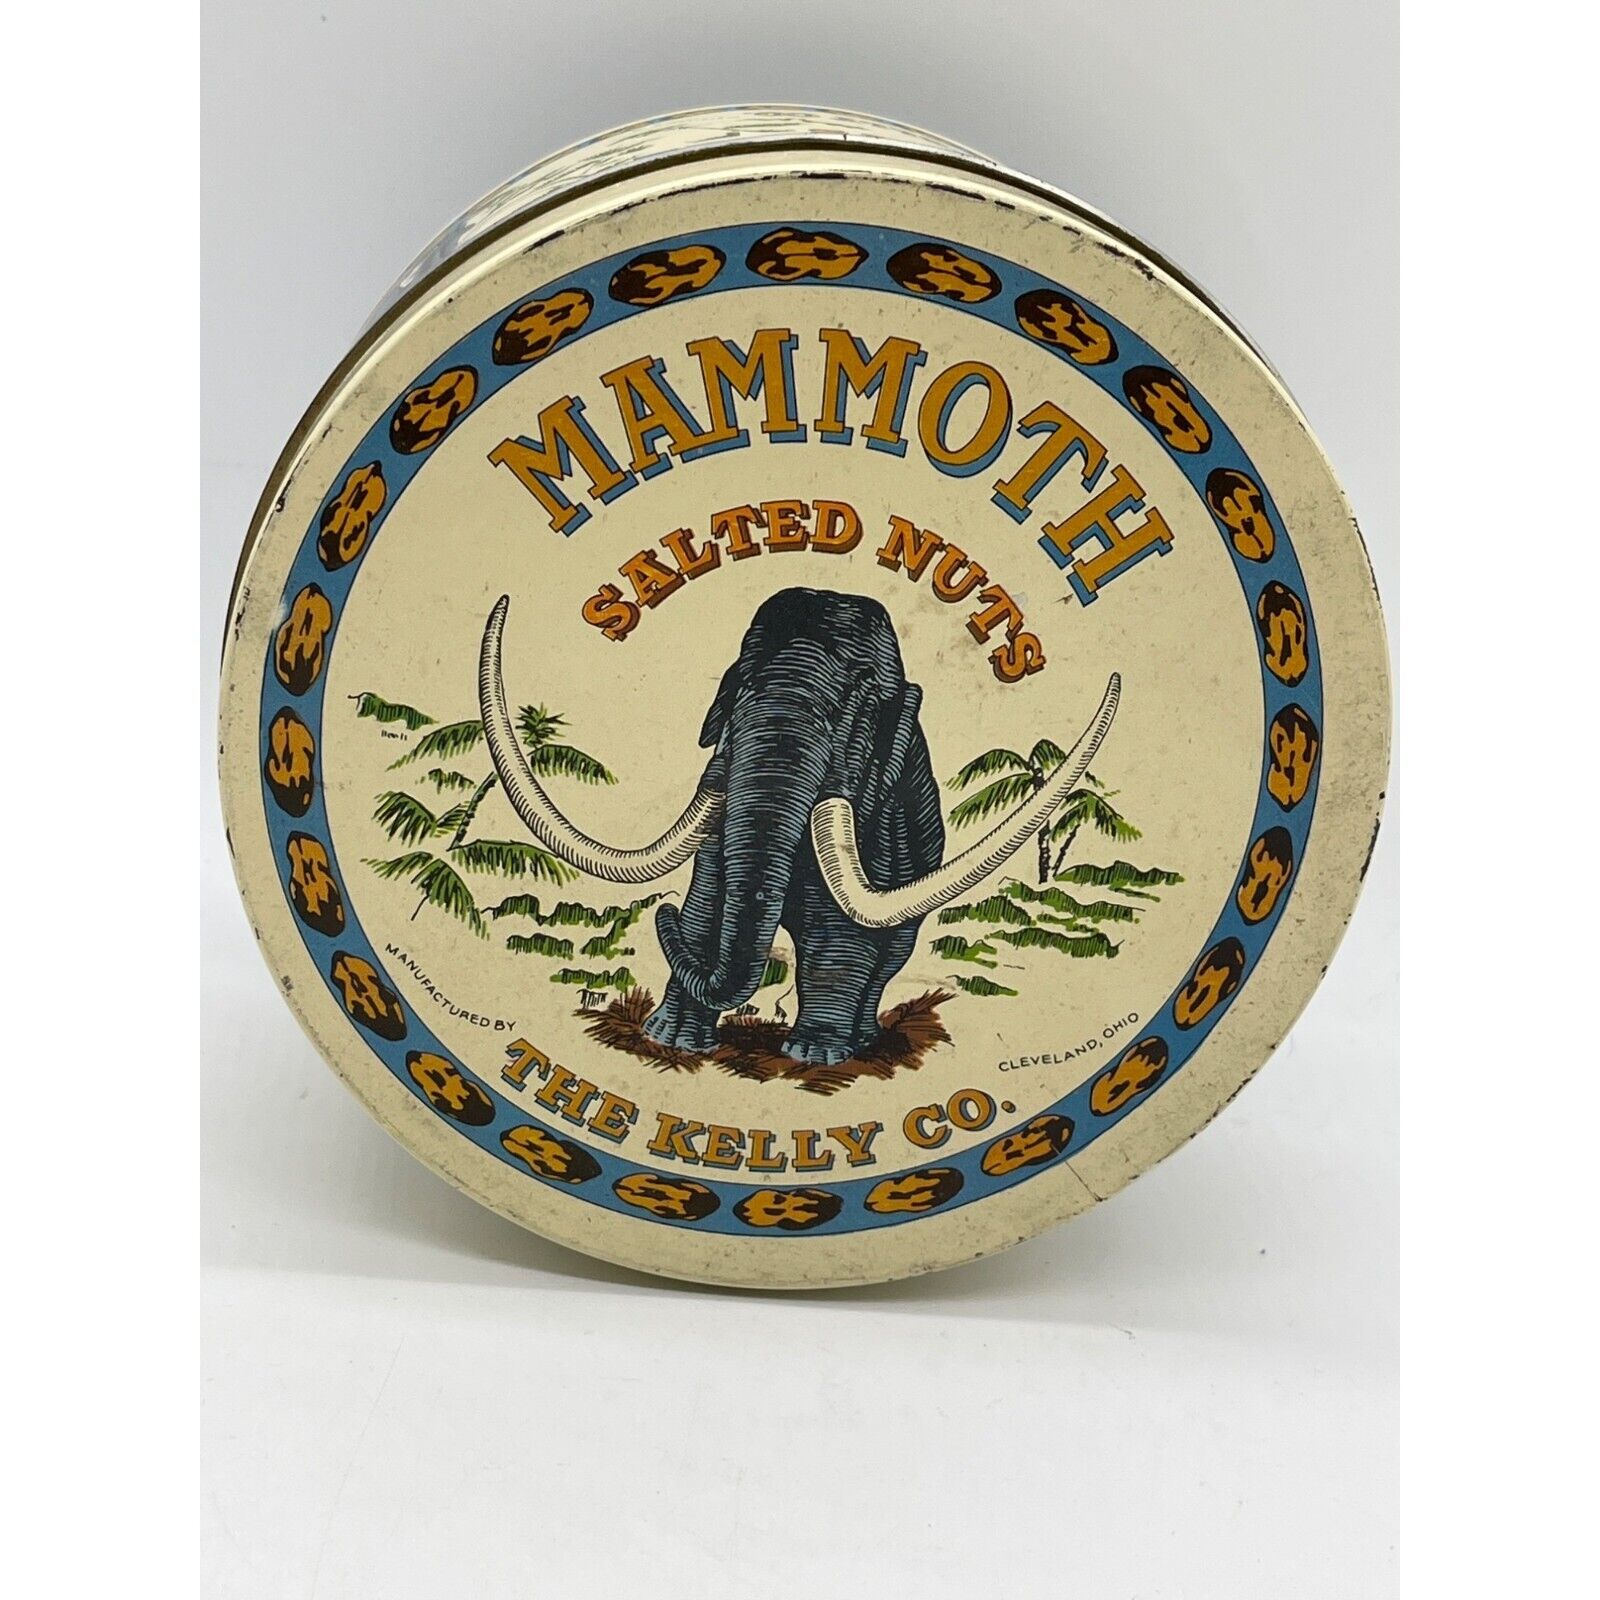 Vintage Mammoth Salted Nuts Tin The Kelly Co Cleveland Ohio